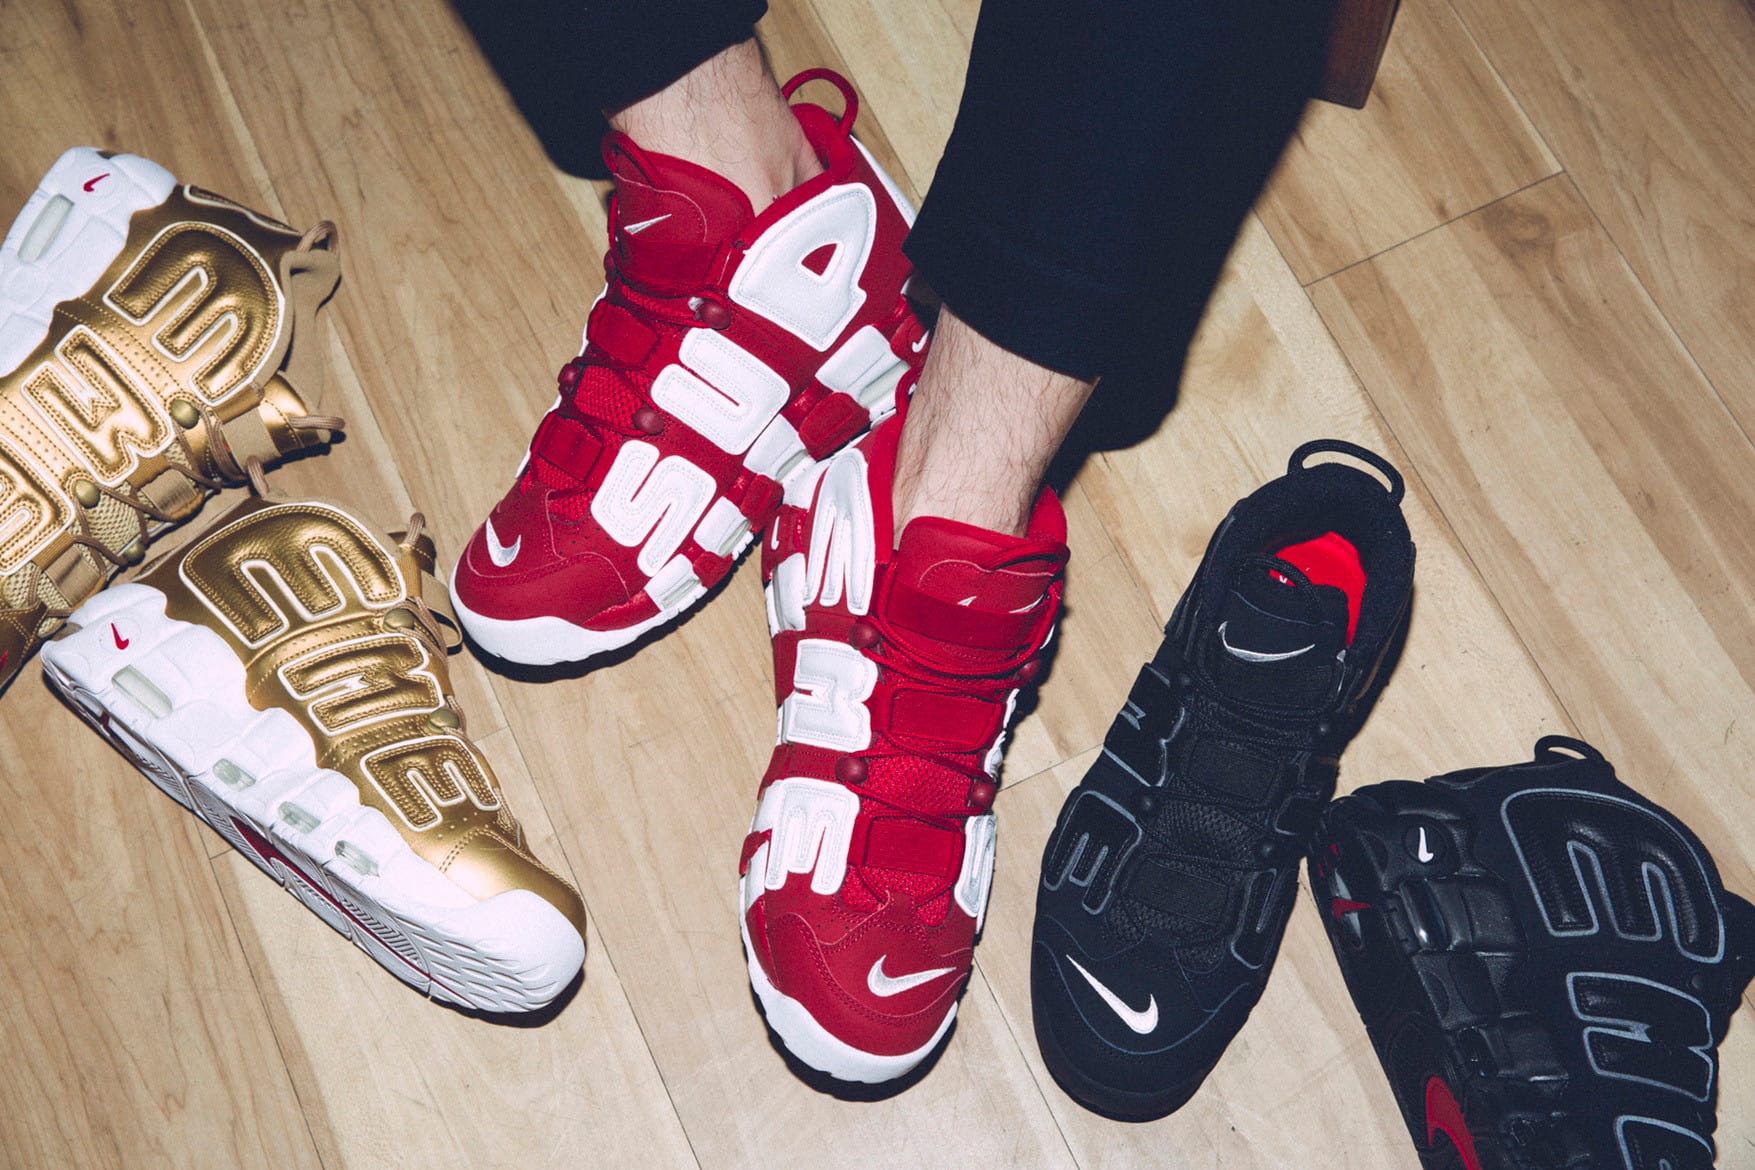 Supreme x Nike Best Sneakers/Apparel Collaborations | HYPEBEAST